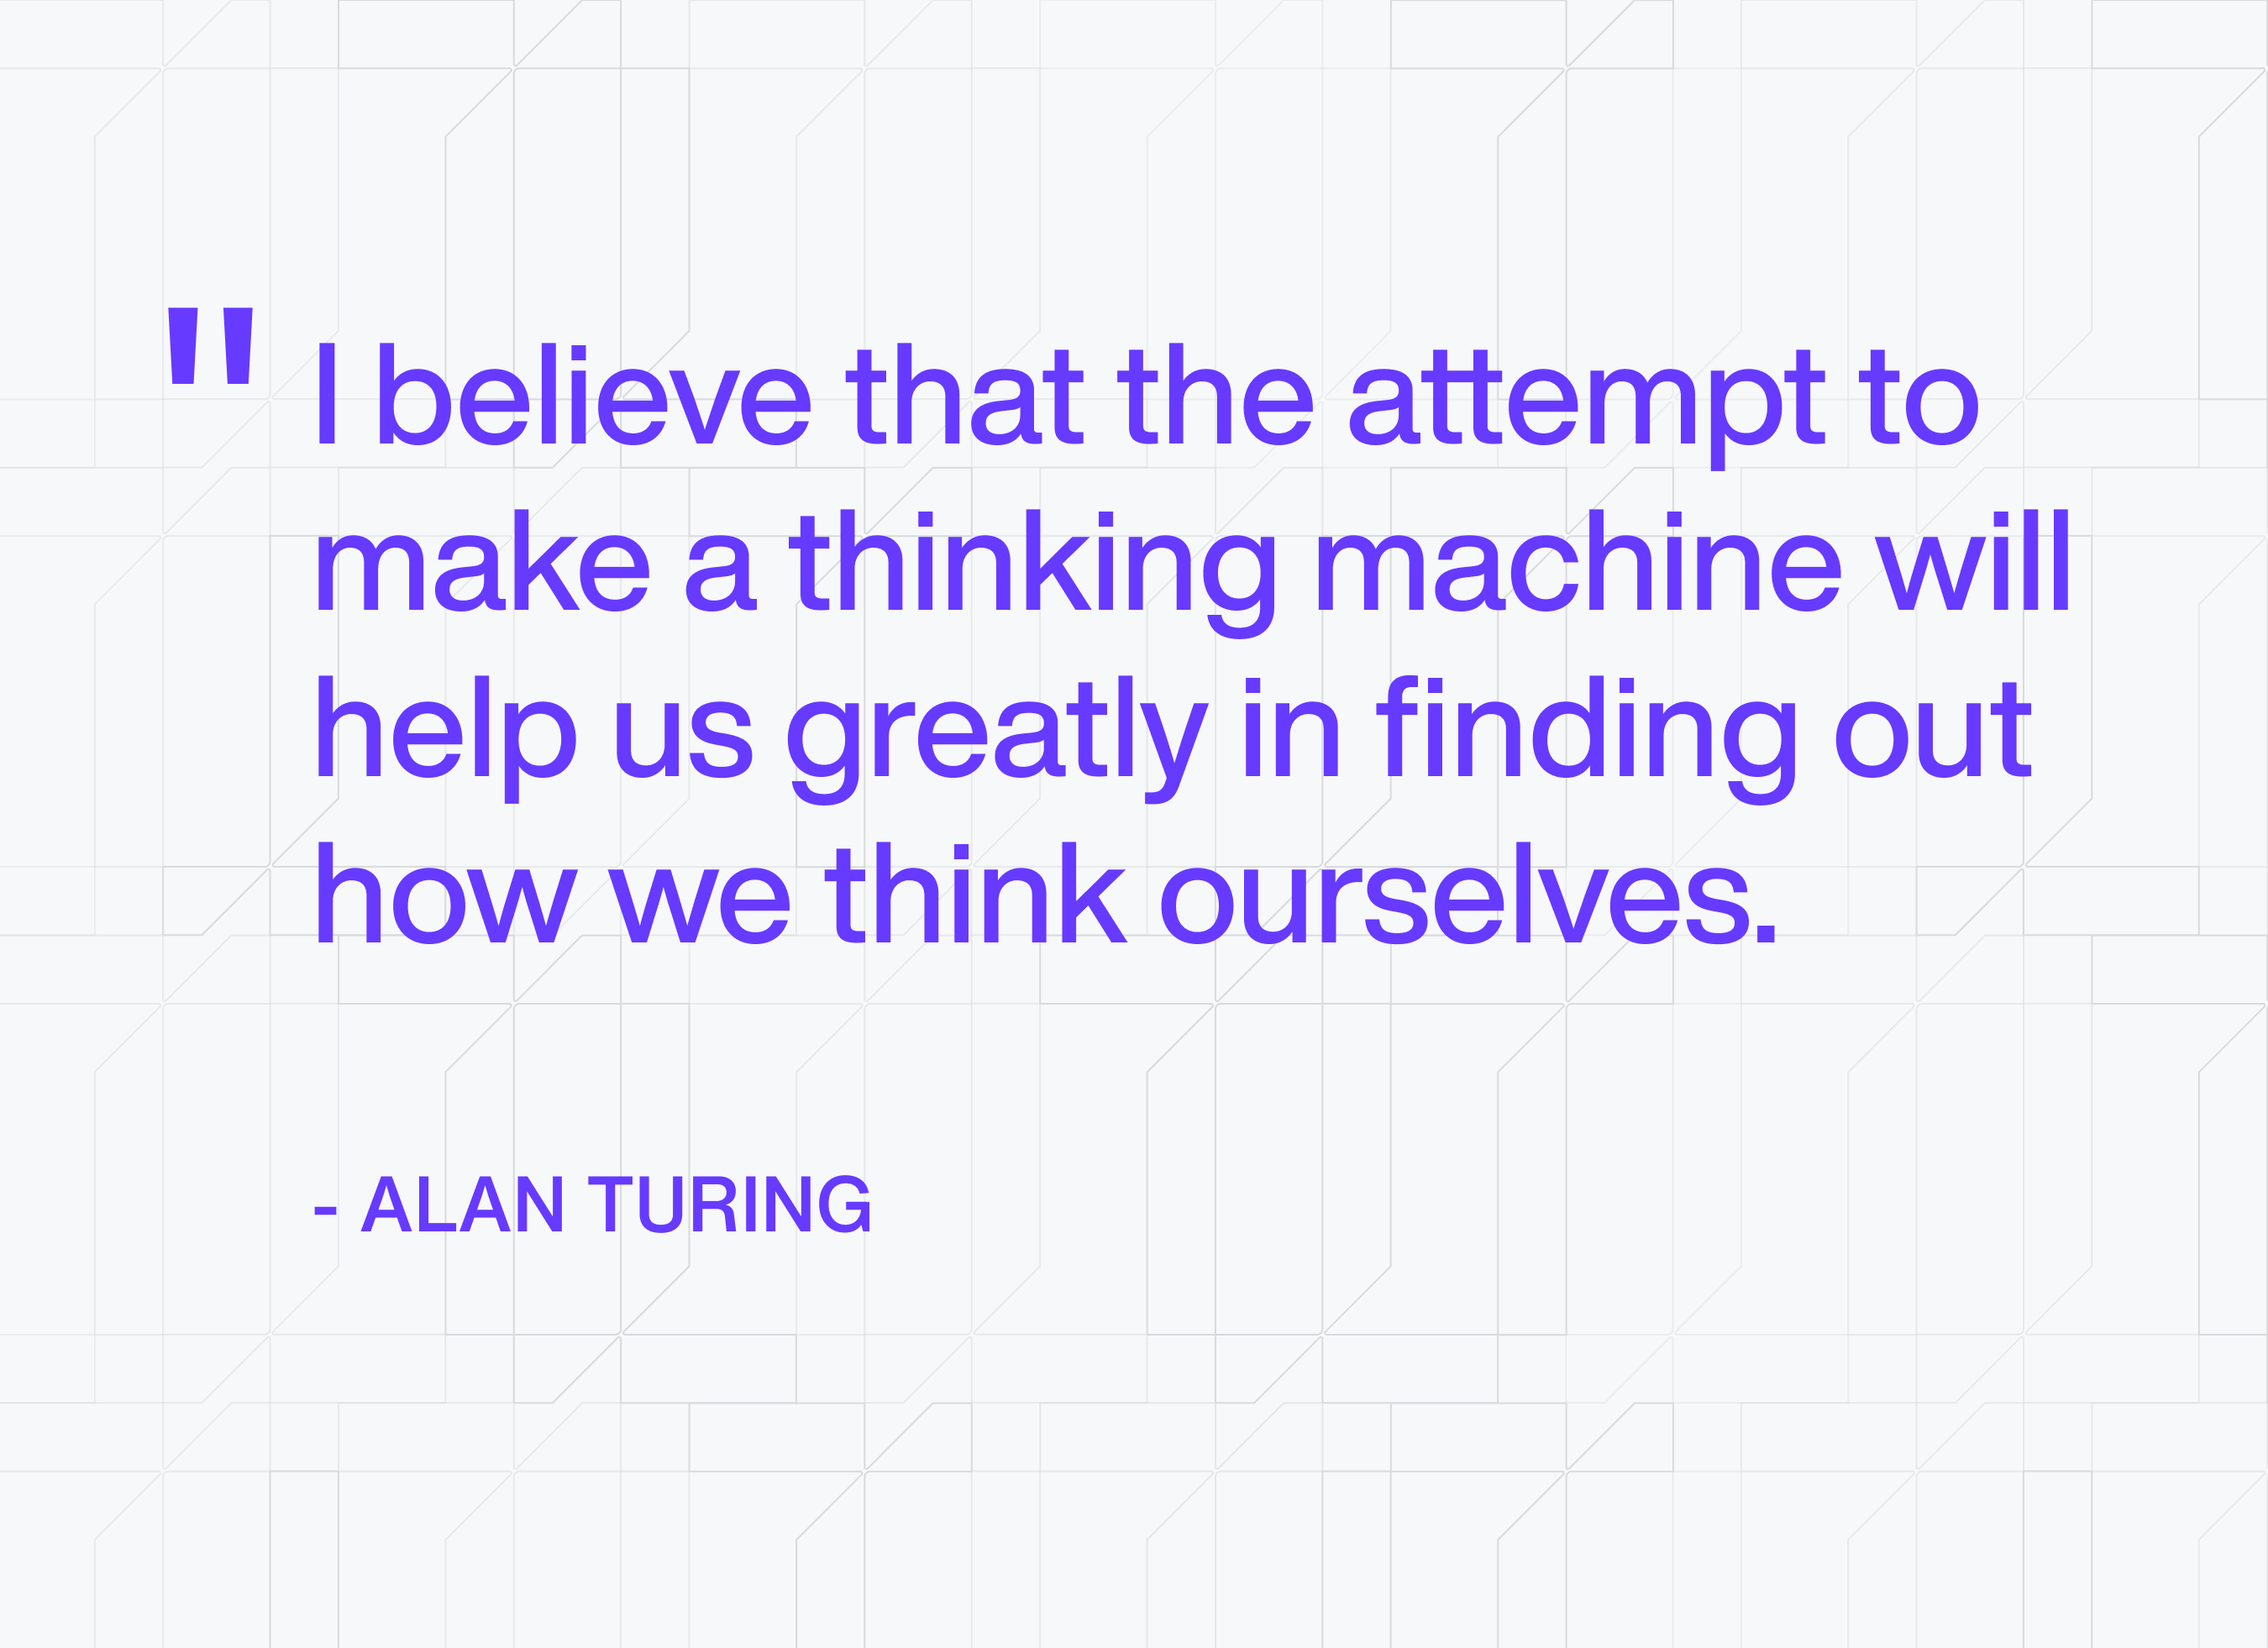 Quote by Alan Turing about a thinking machine